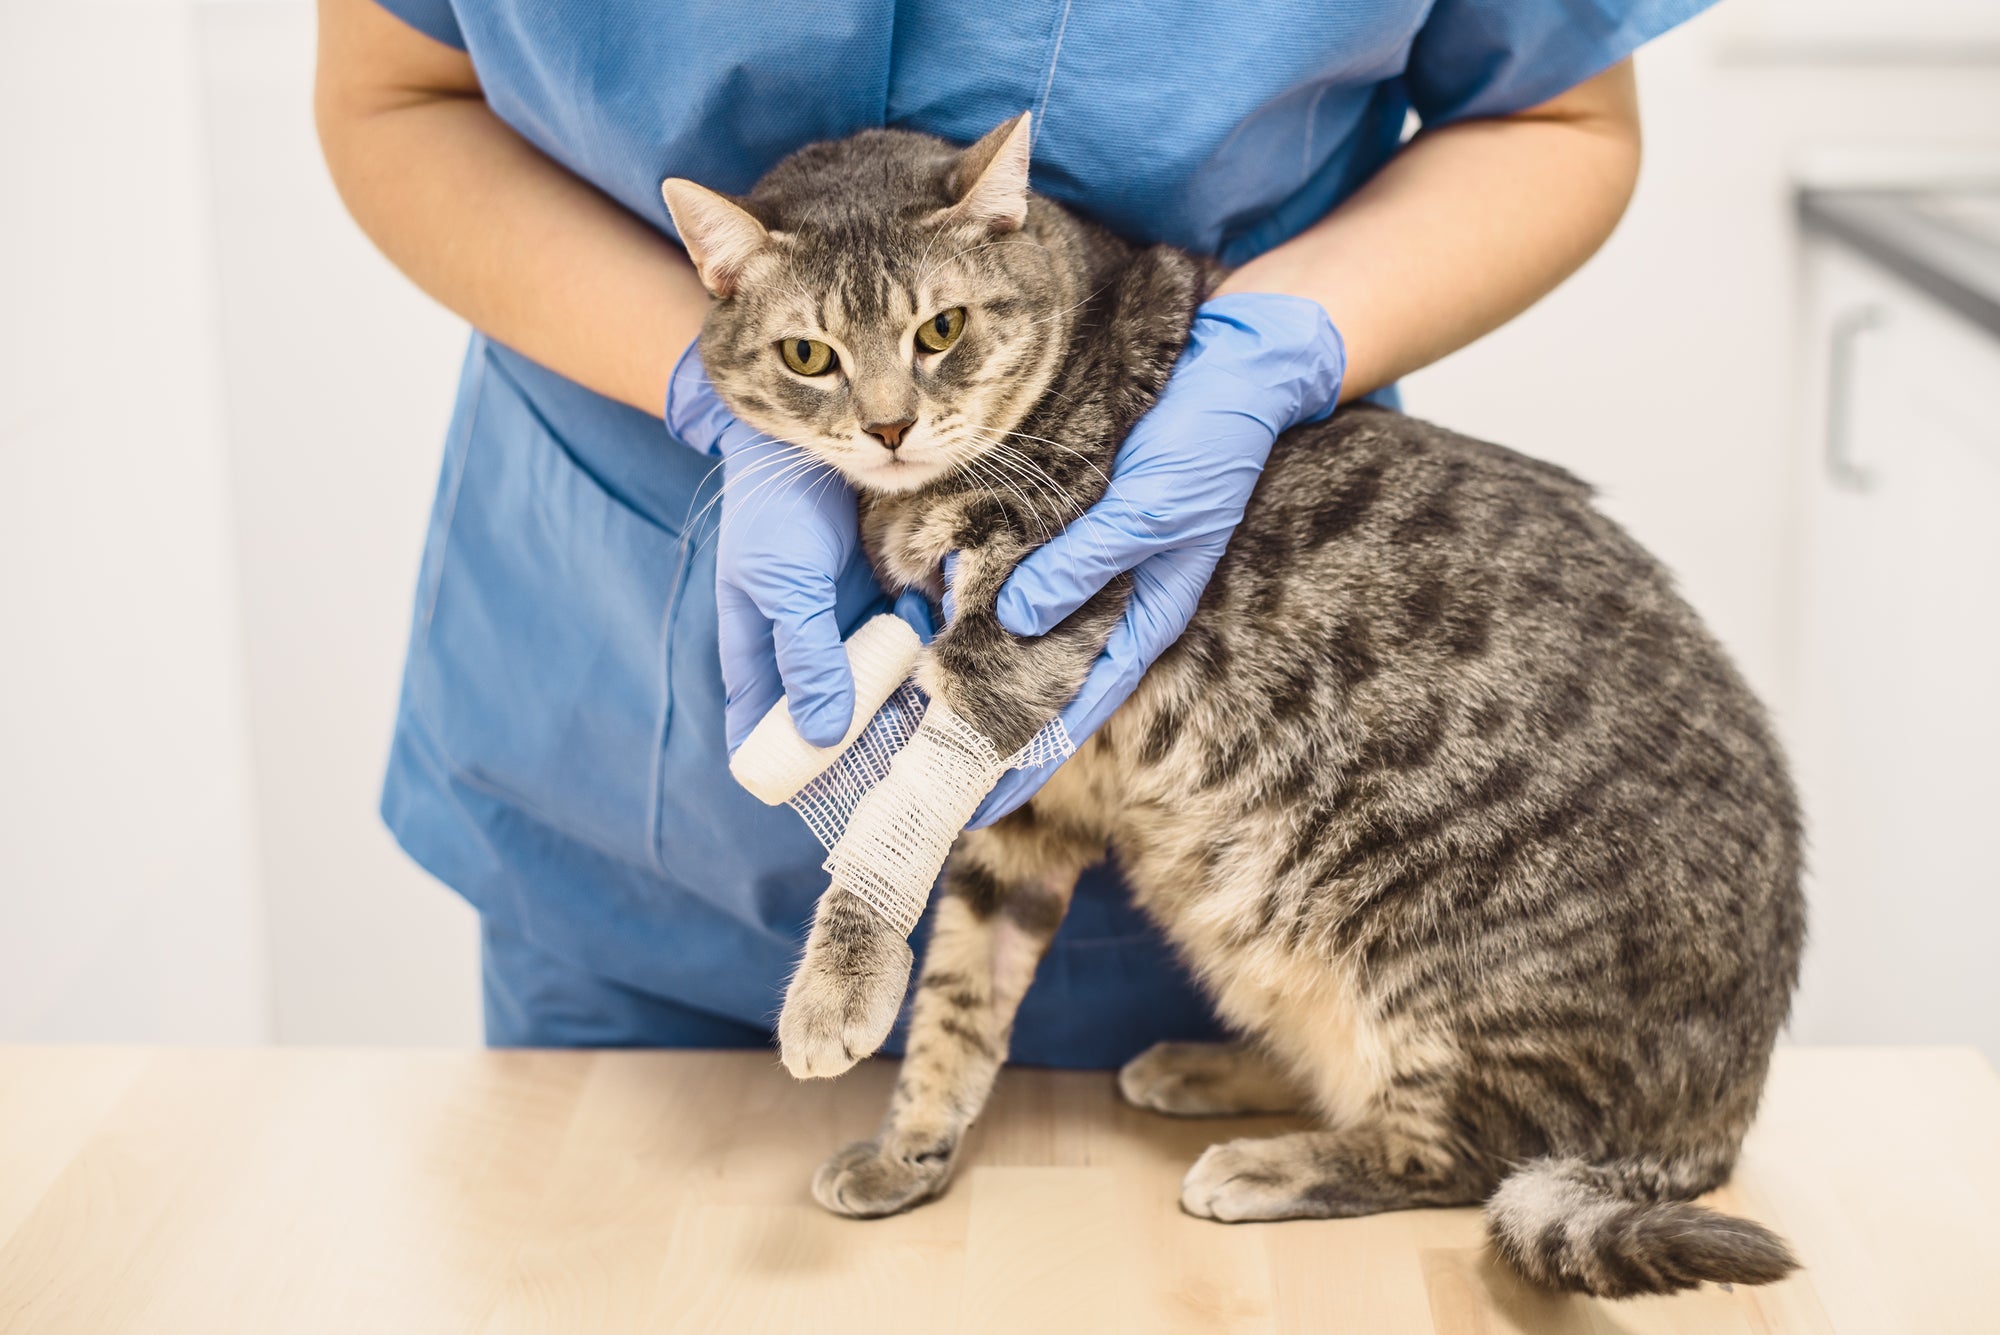 Your Cat Broke Its Leg: Now What?